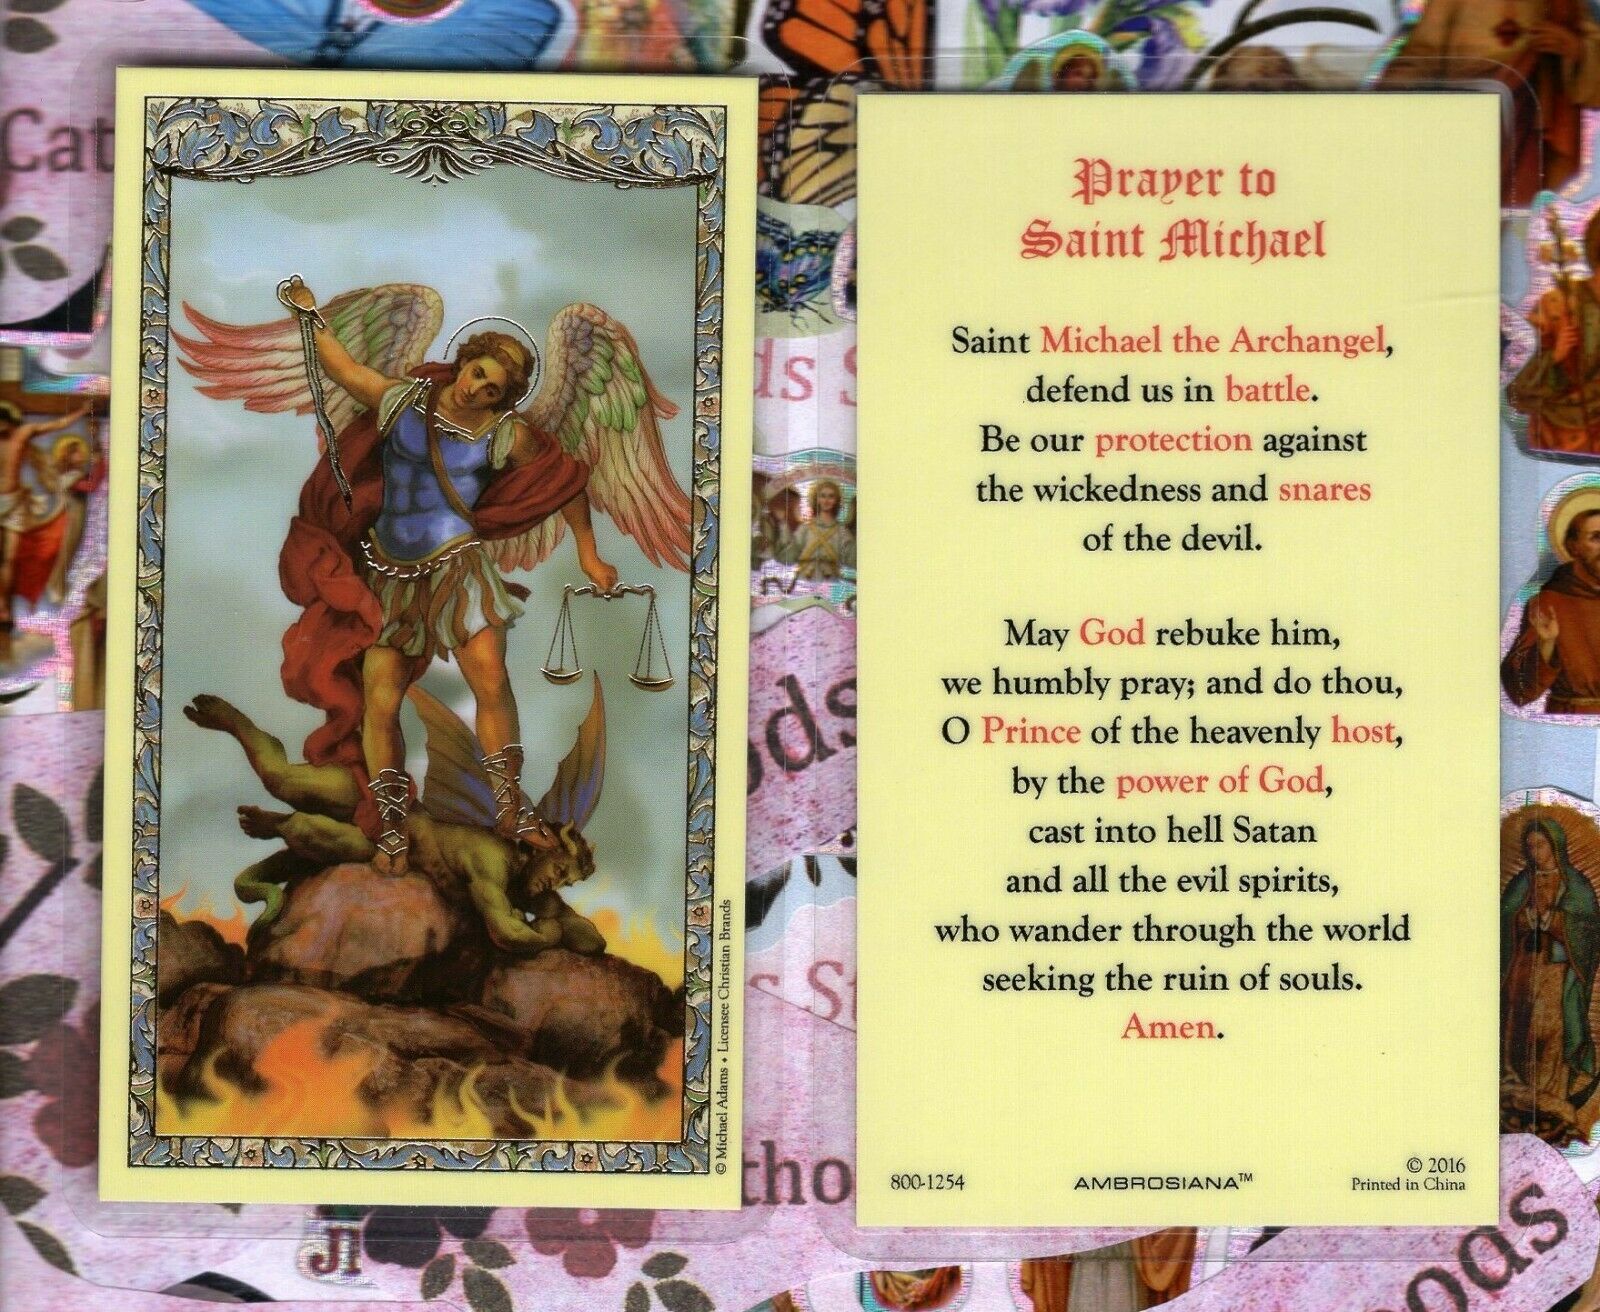 St. Michael the Archangel with Saint Michael's Prayer - Laminated Holy Card 1254